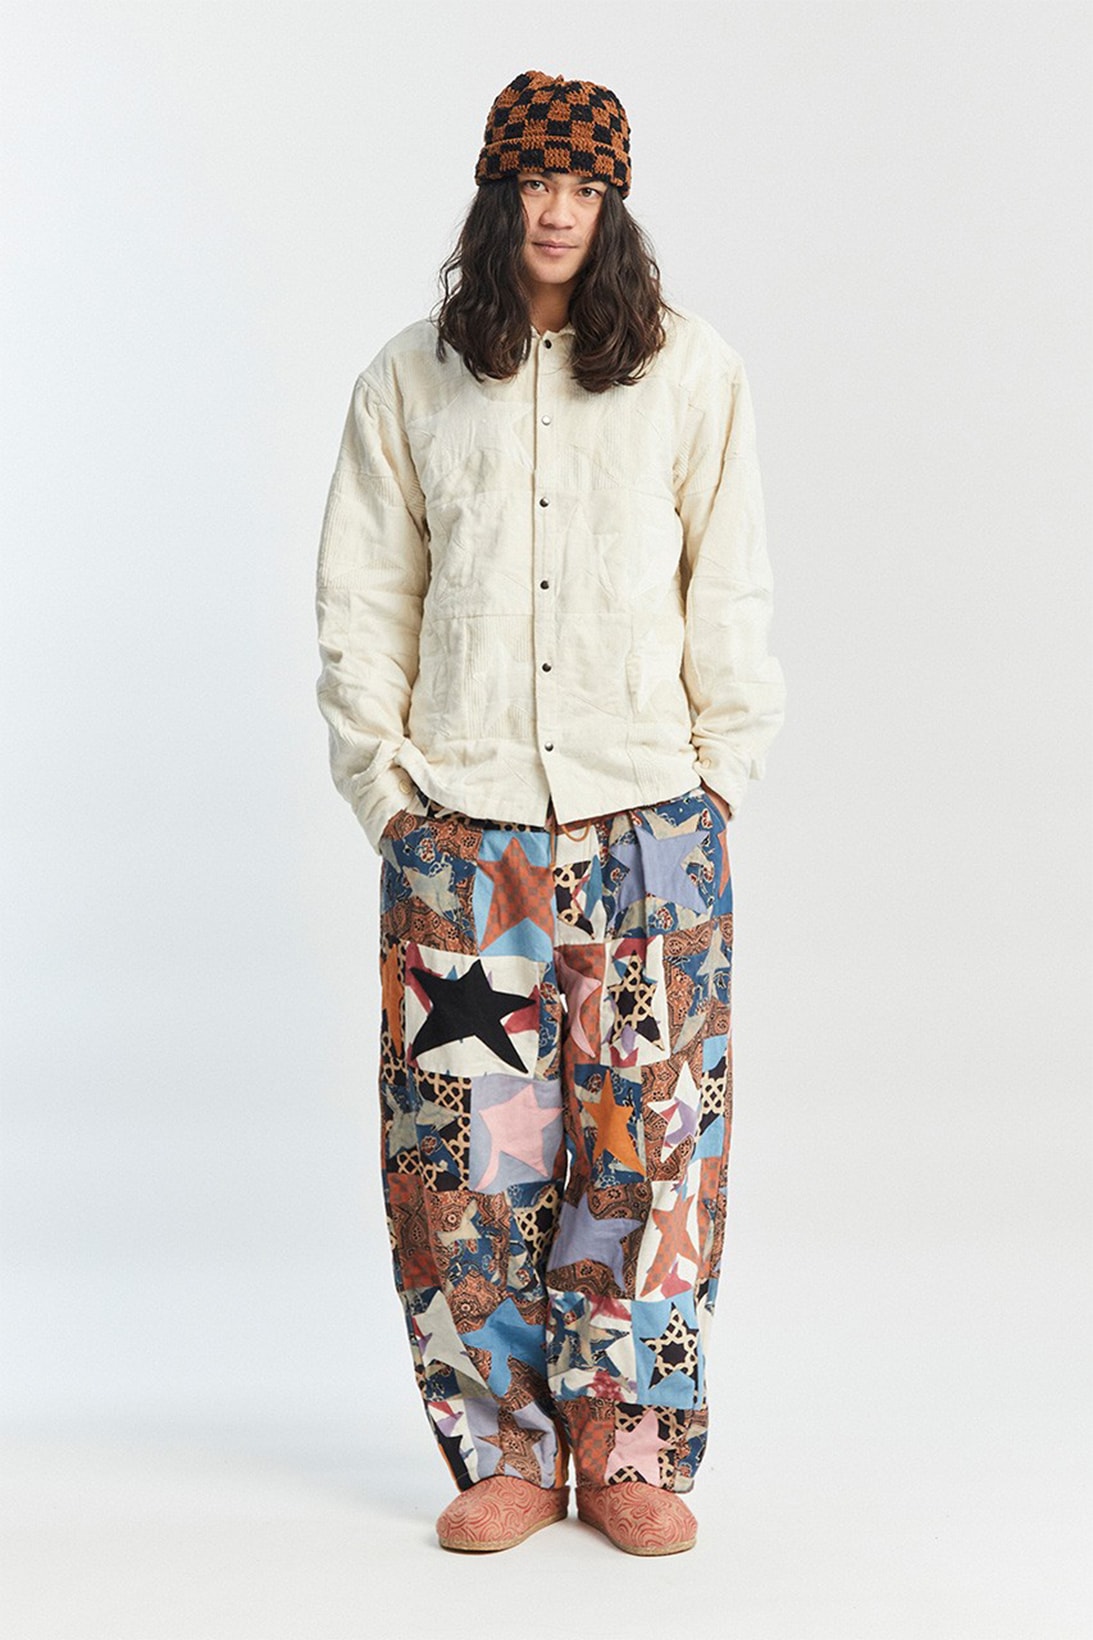 Story Mfg. Try Try Try Fall Winter Collection Lookbook Shirts Pants